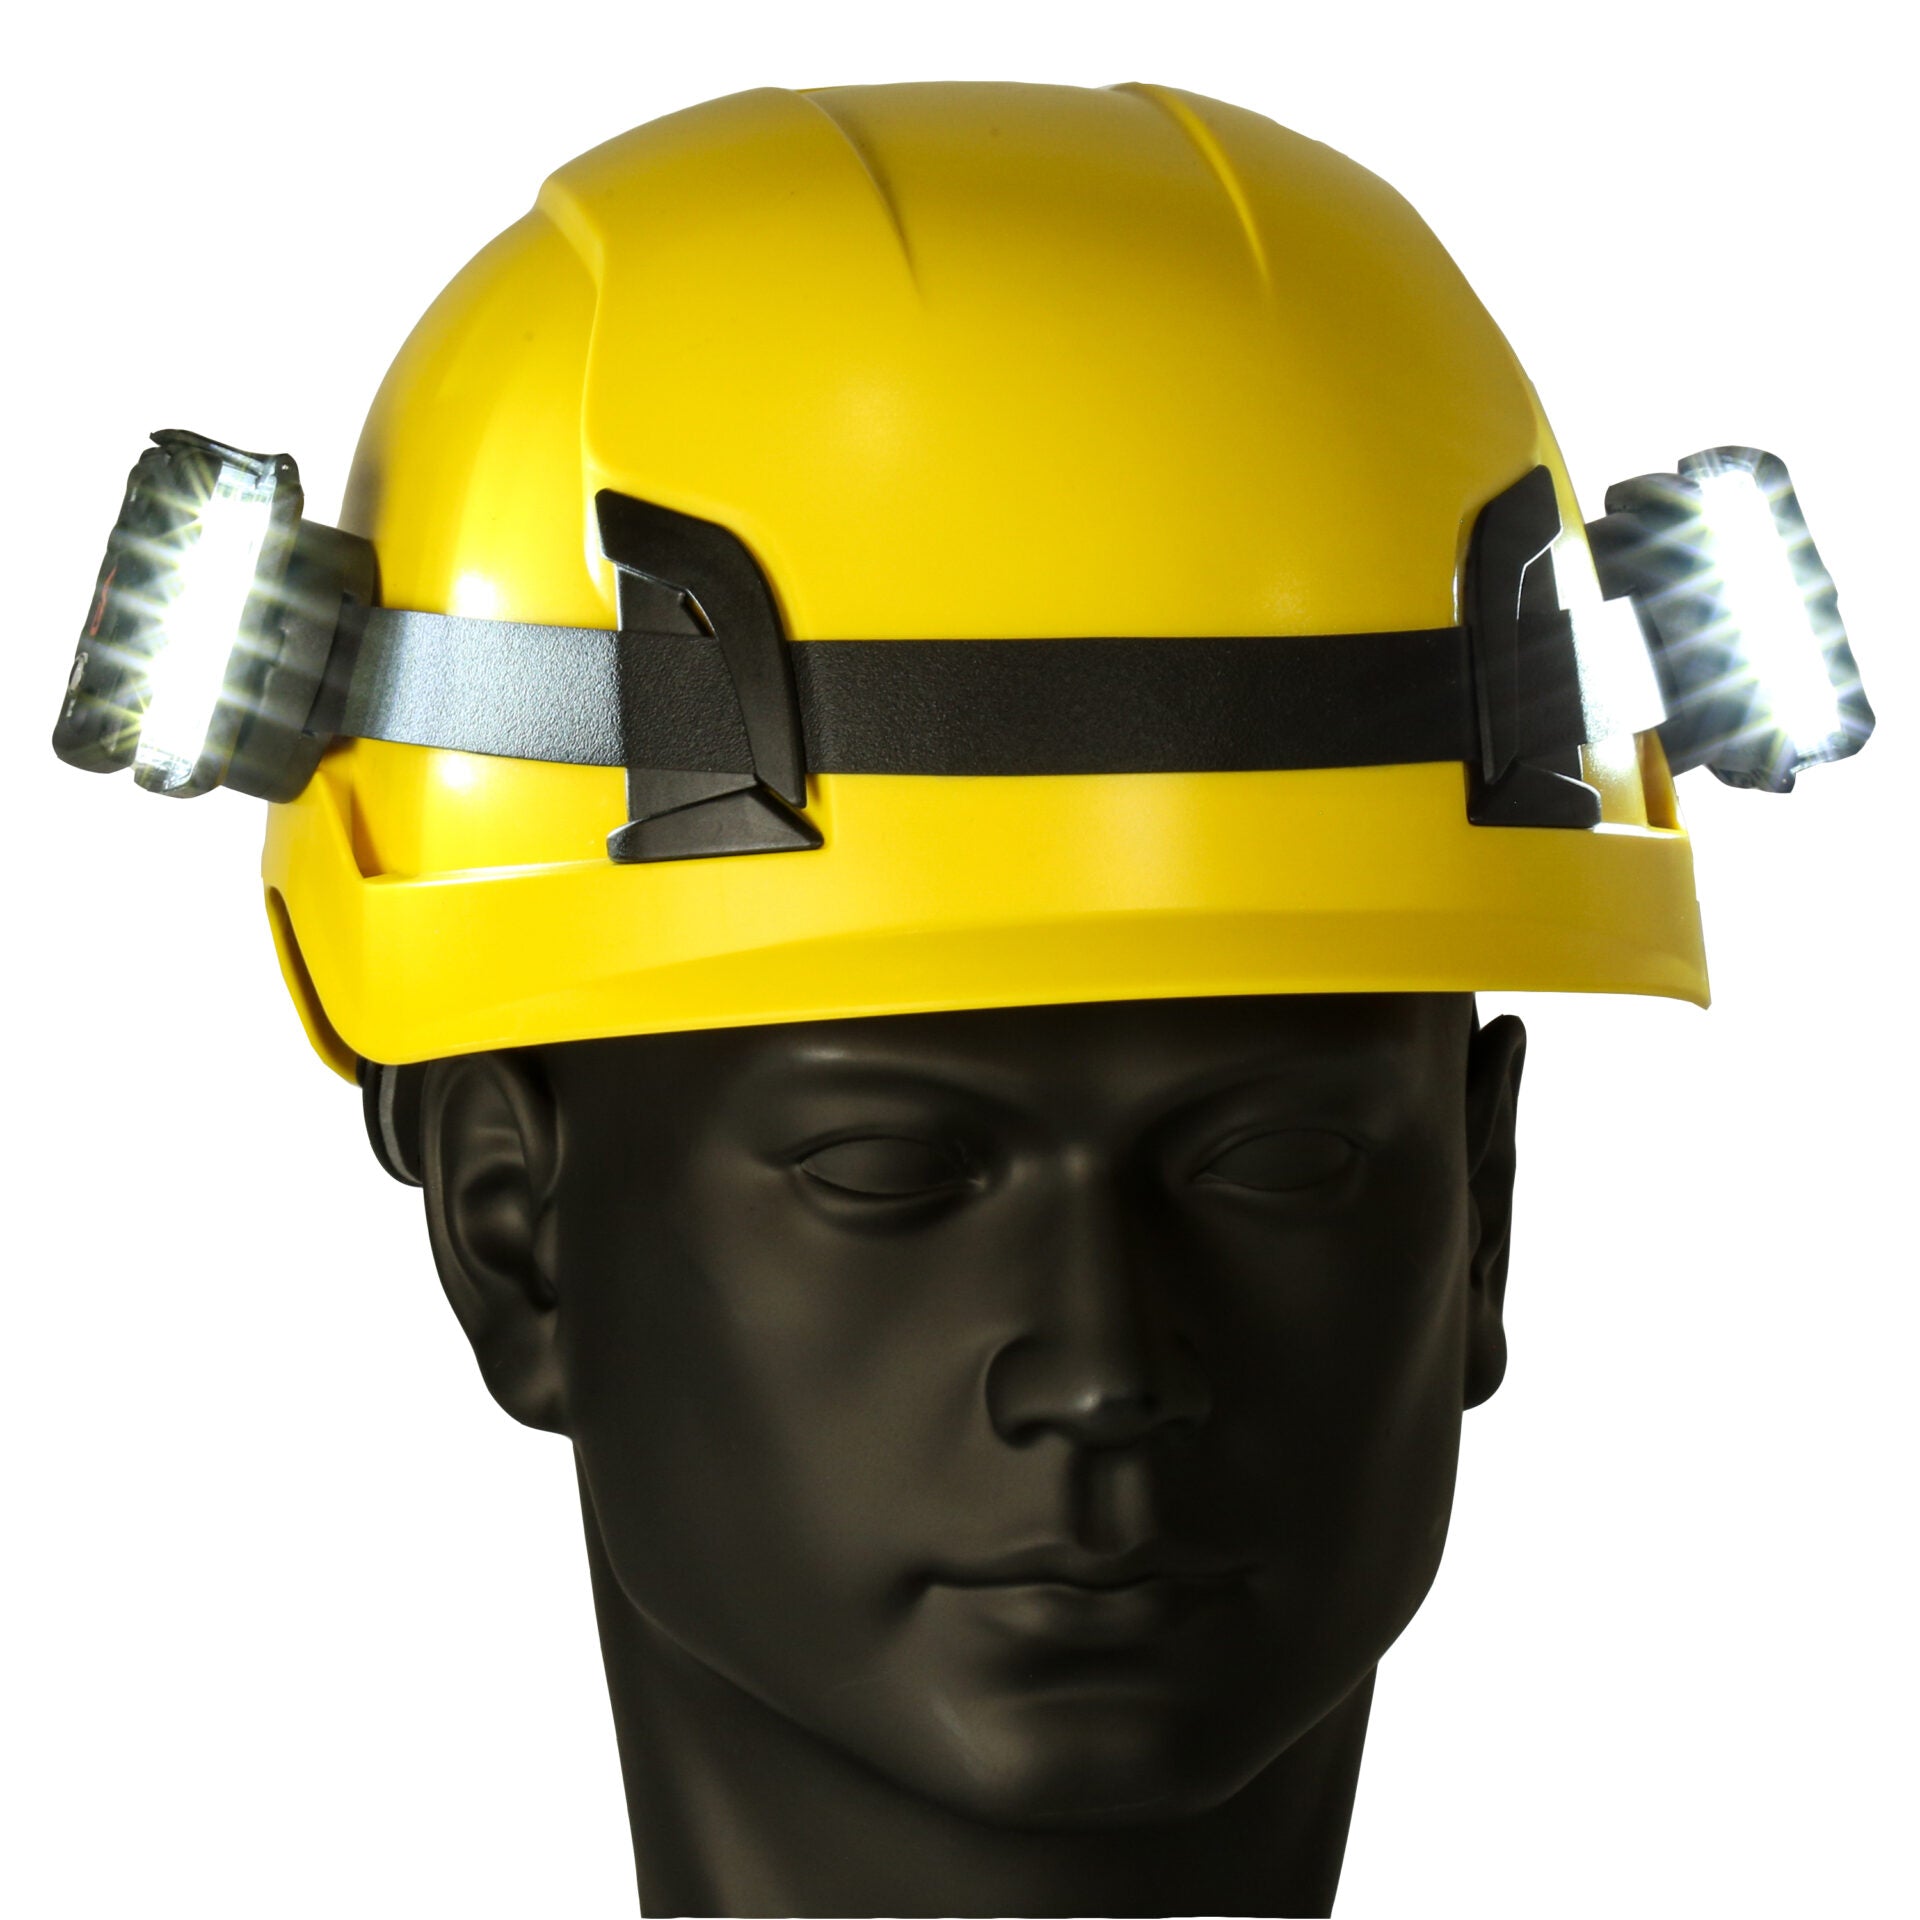 Guardian Angel Helmet Strap with Two Magnetic Mounts (ACC-HHMS)